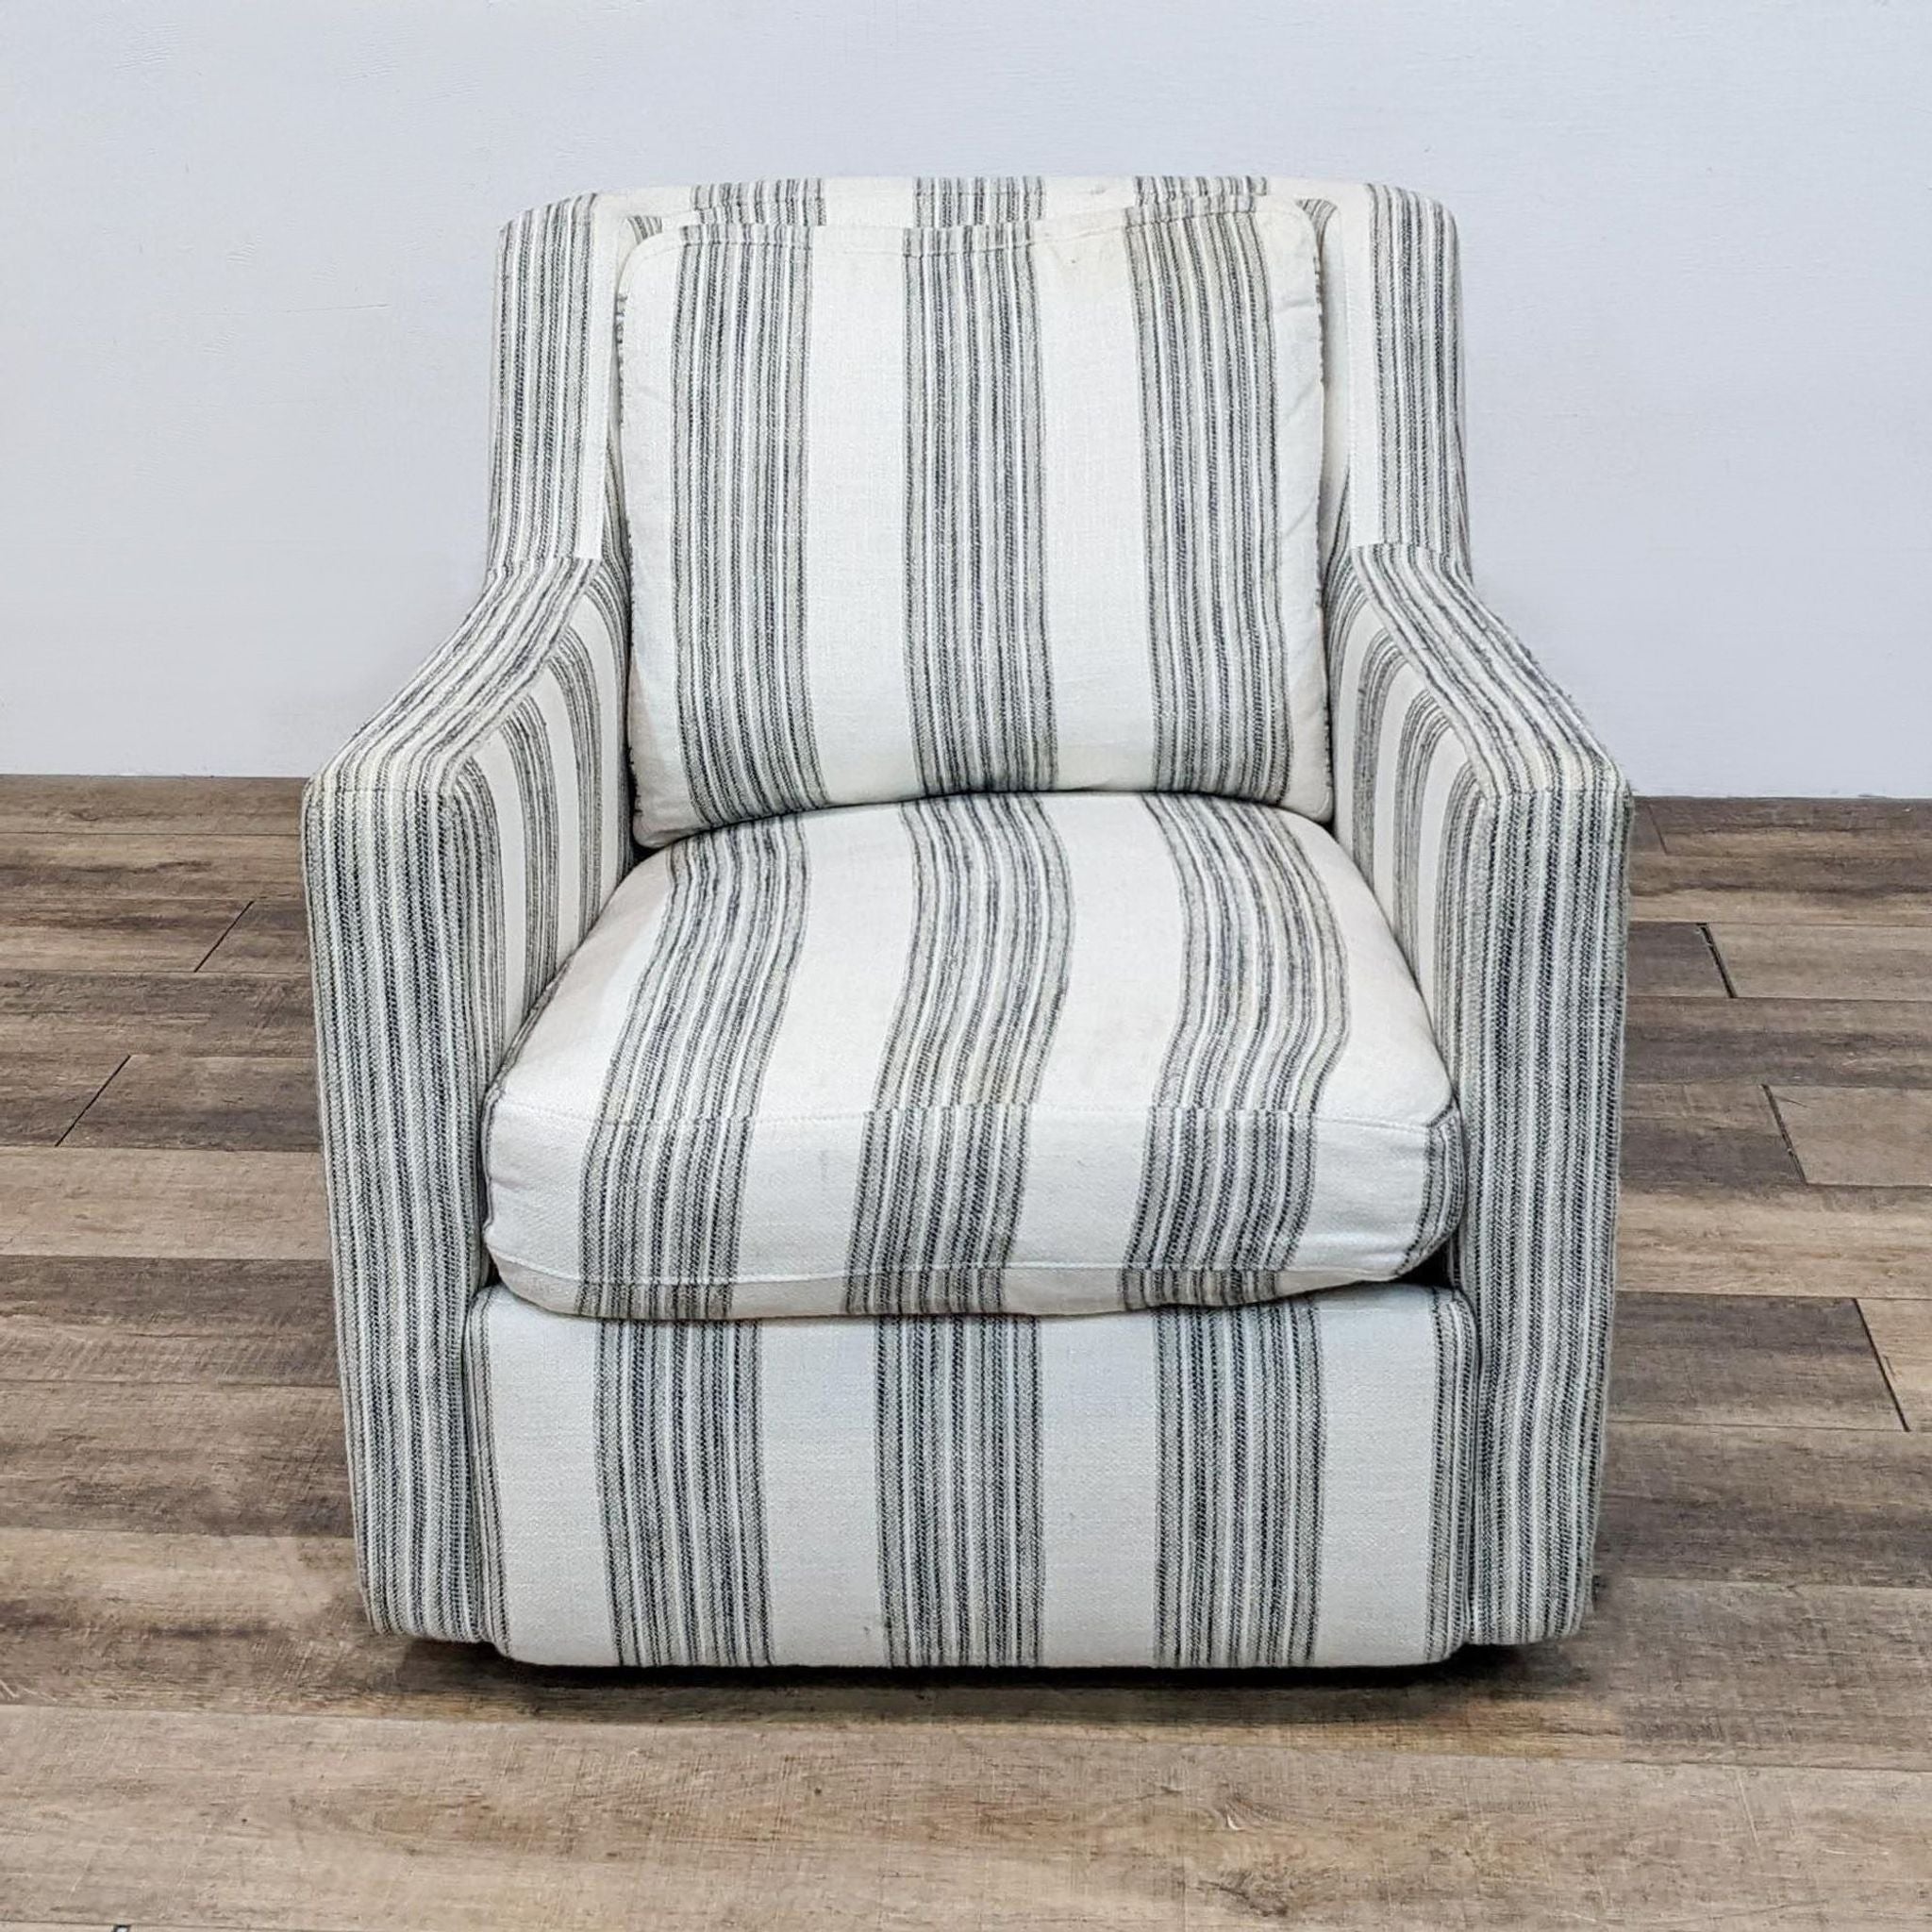 Ivory and black upholstered swivel chair by Comfort Design with striped pattern and removable cushions, shown from the front.